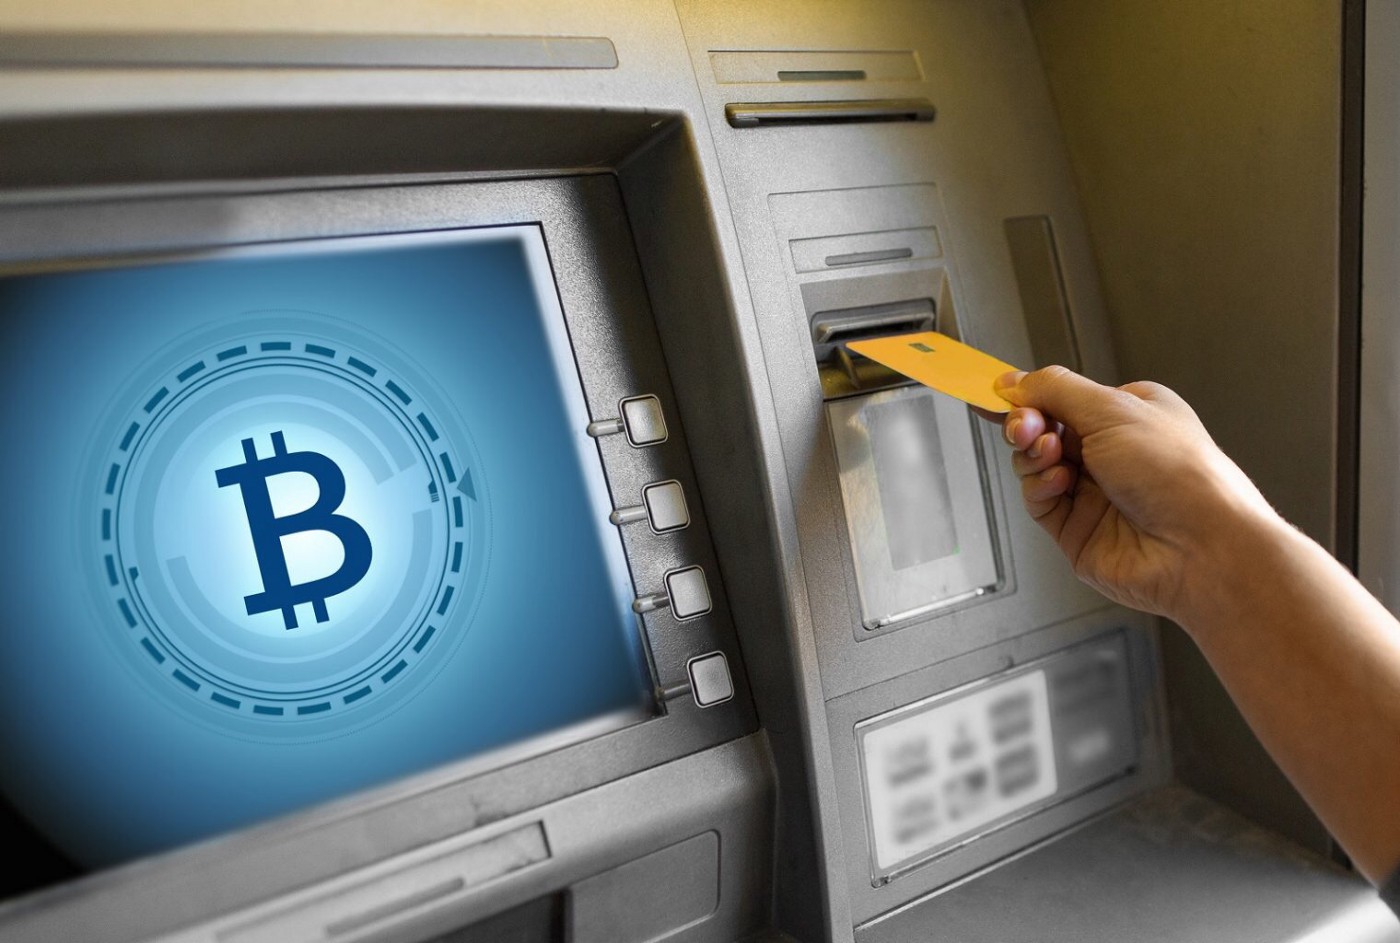 Bitcoin ATMs: What You Need to Know Before Buying Bitcoin at an ATM